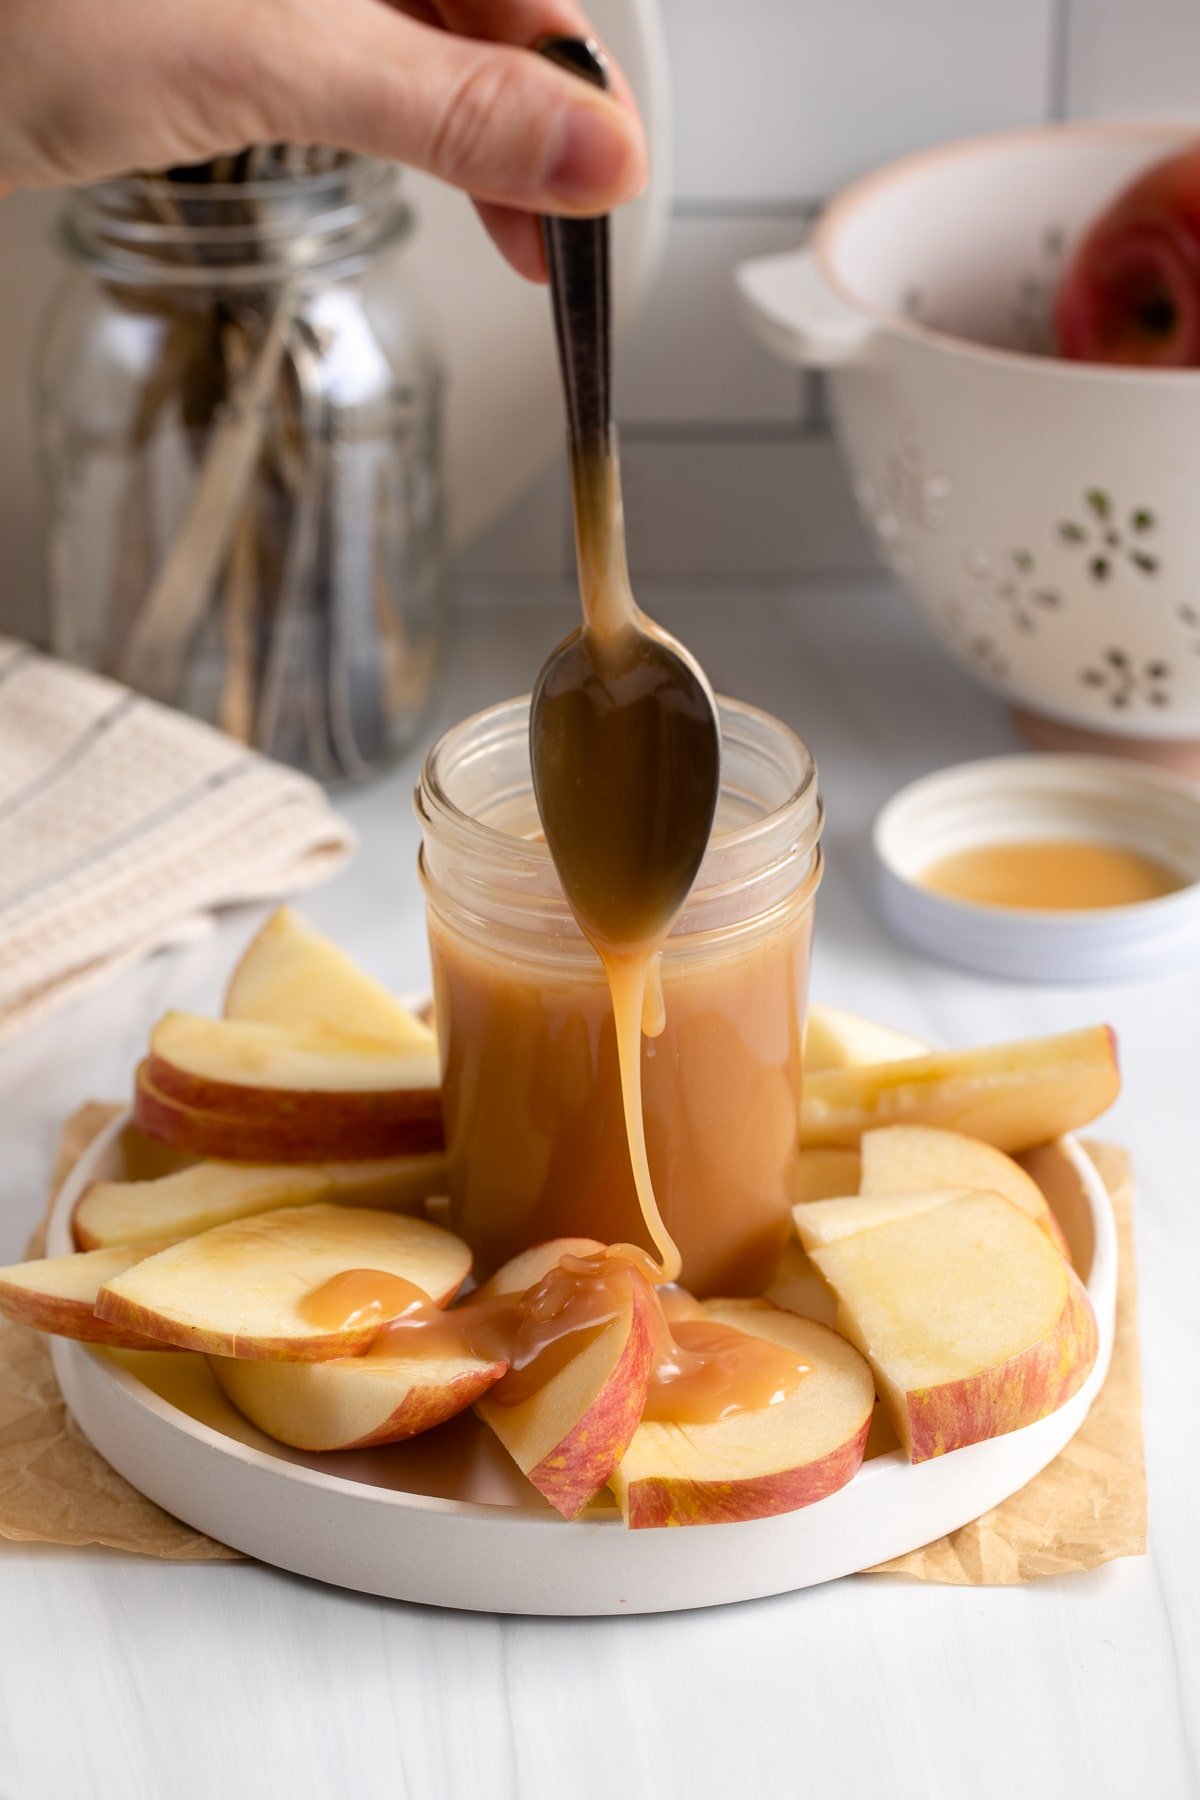 caramel sauce being dripped on apples.